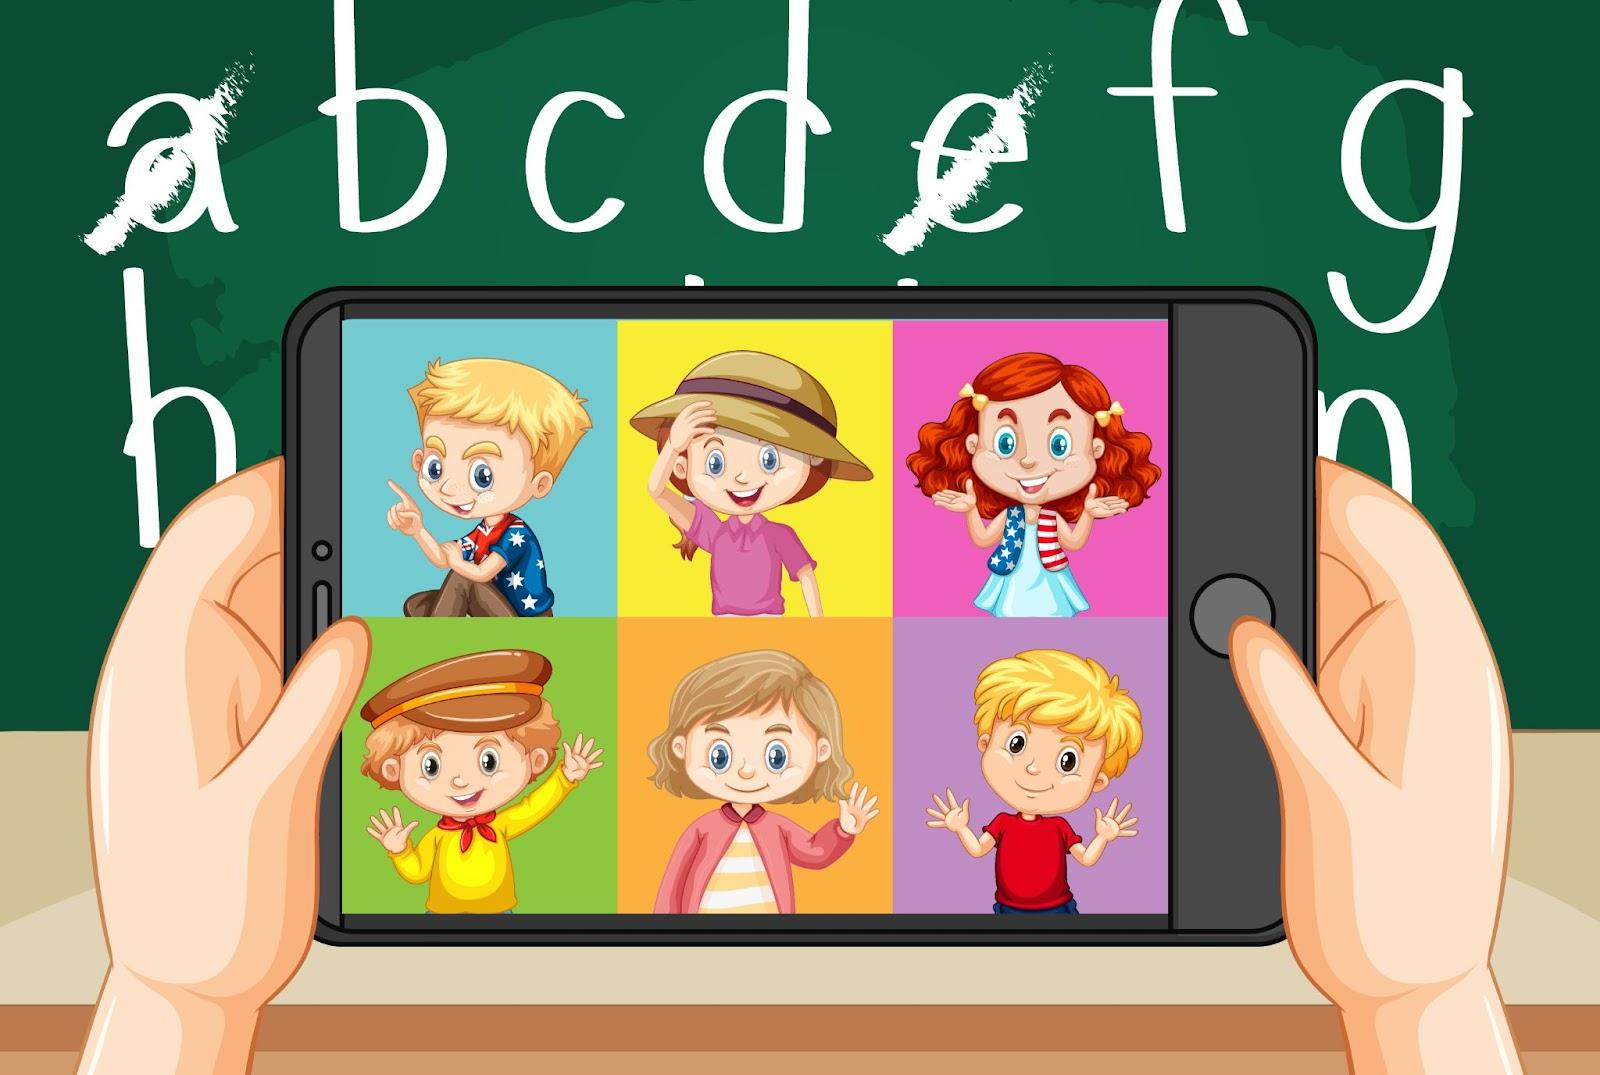 Android apps - how can they boost your child's brain?